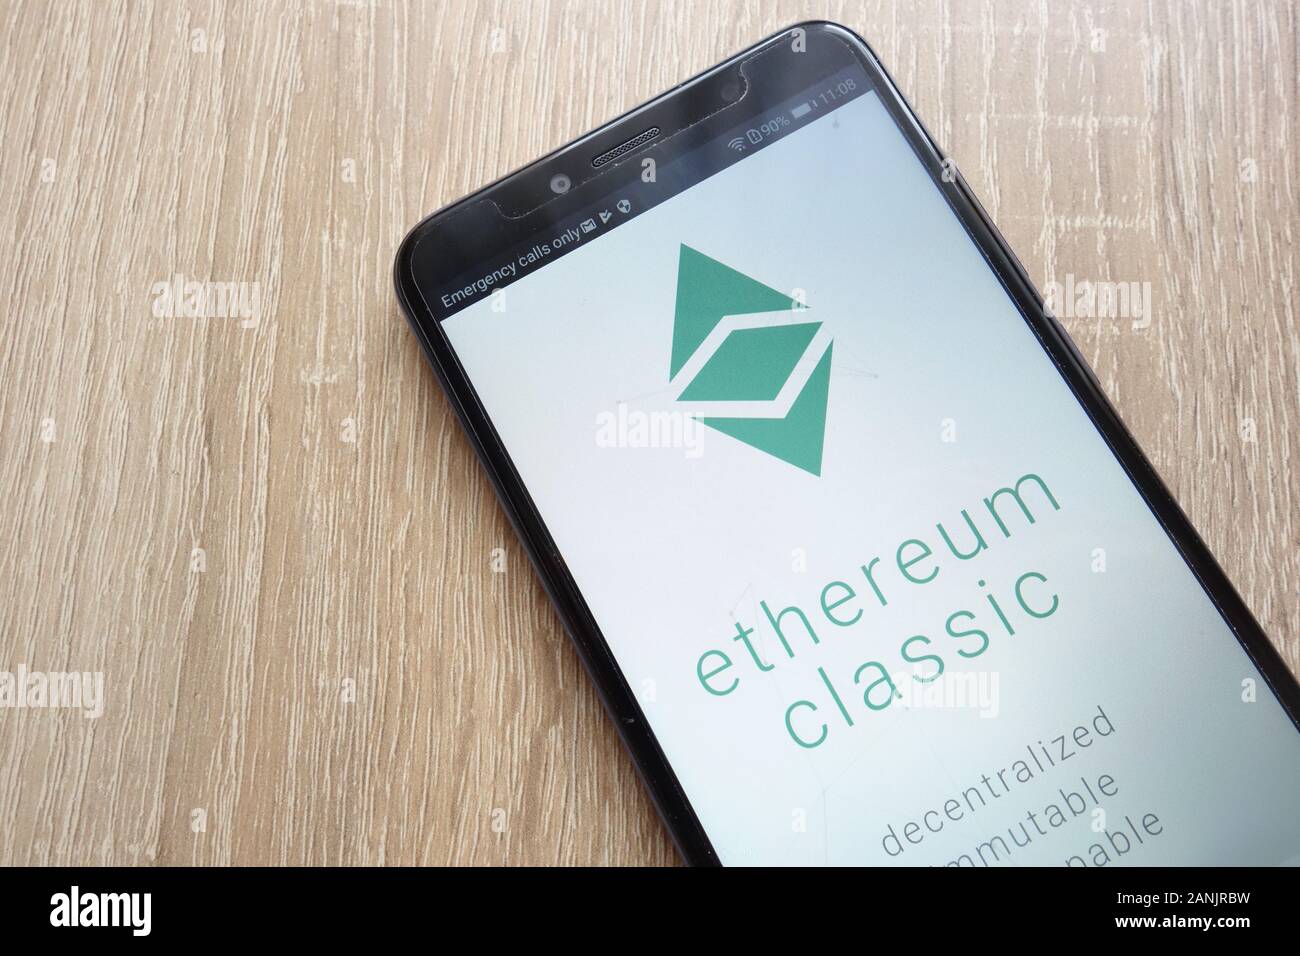 Ethereum Classic (ETC) cryptocurrency website displayed on Huawei Y6 2018 smartphone Stock Photo